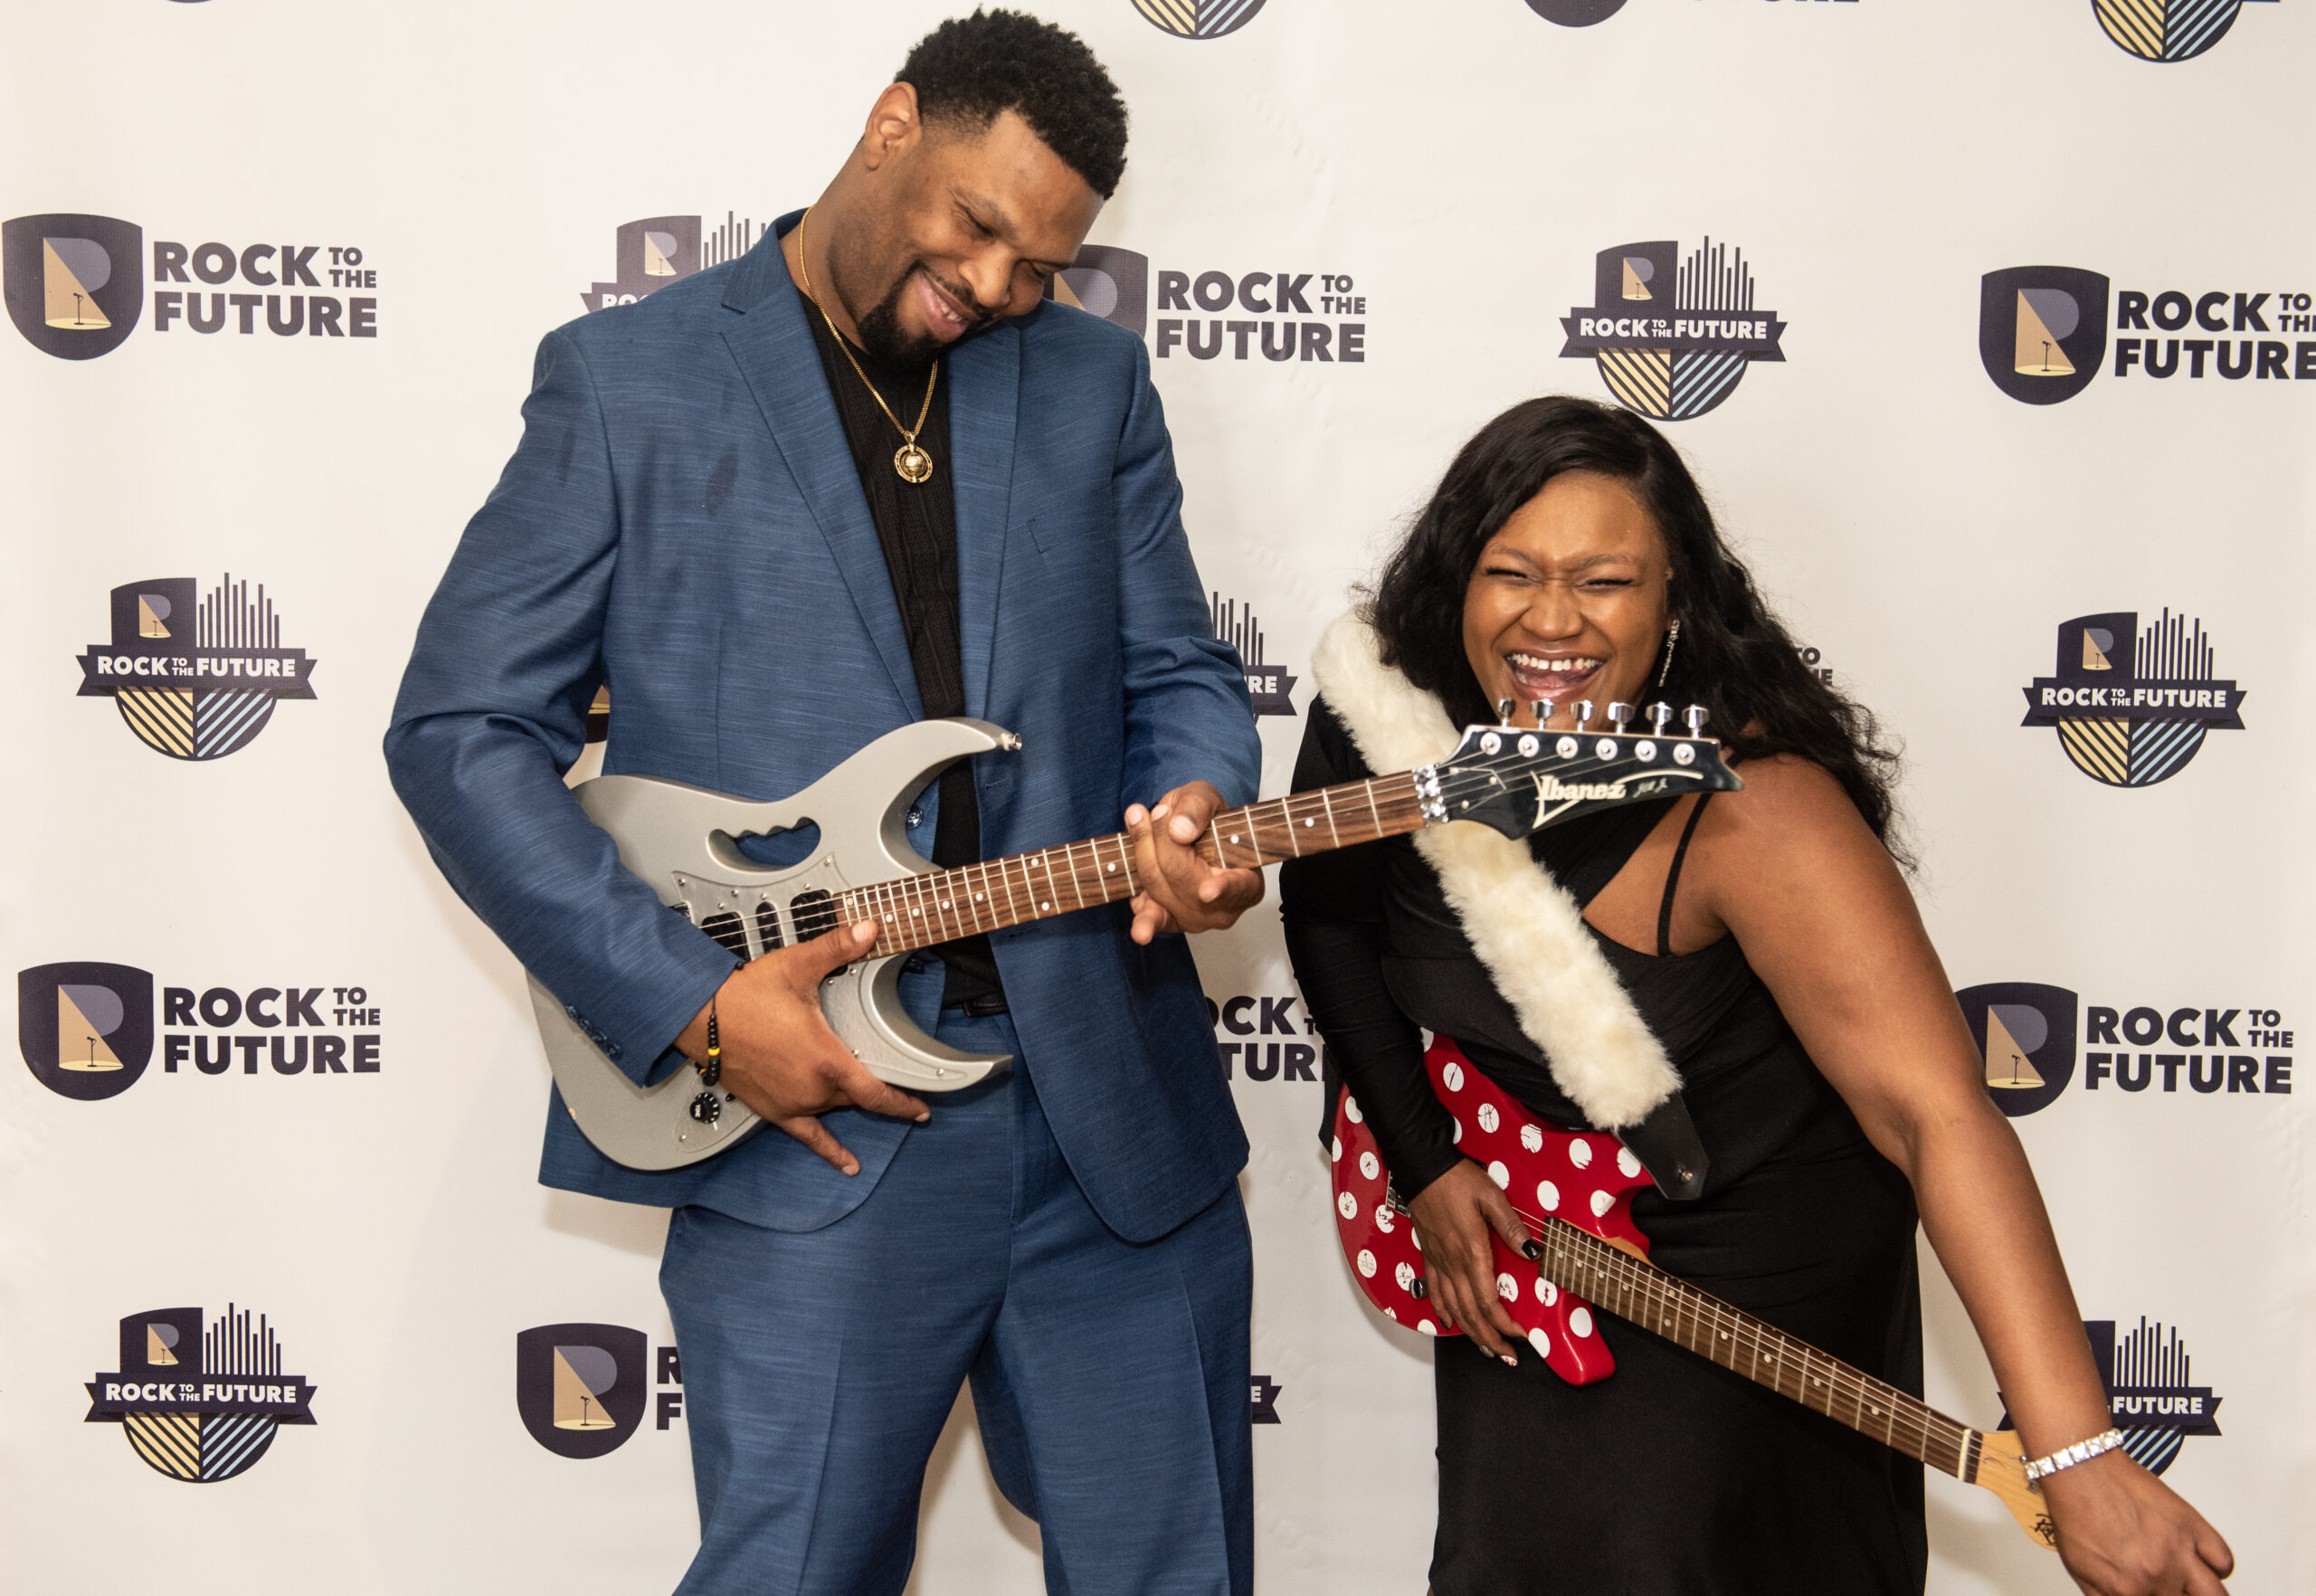 Rock to the Future family attends Music for all Ball and pose with guitars.